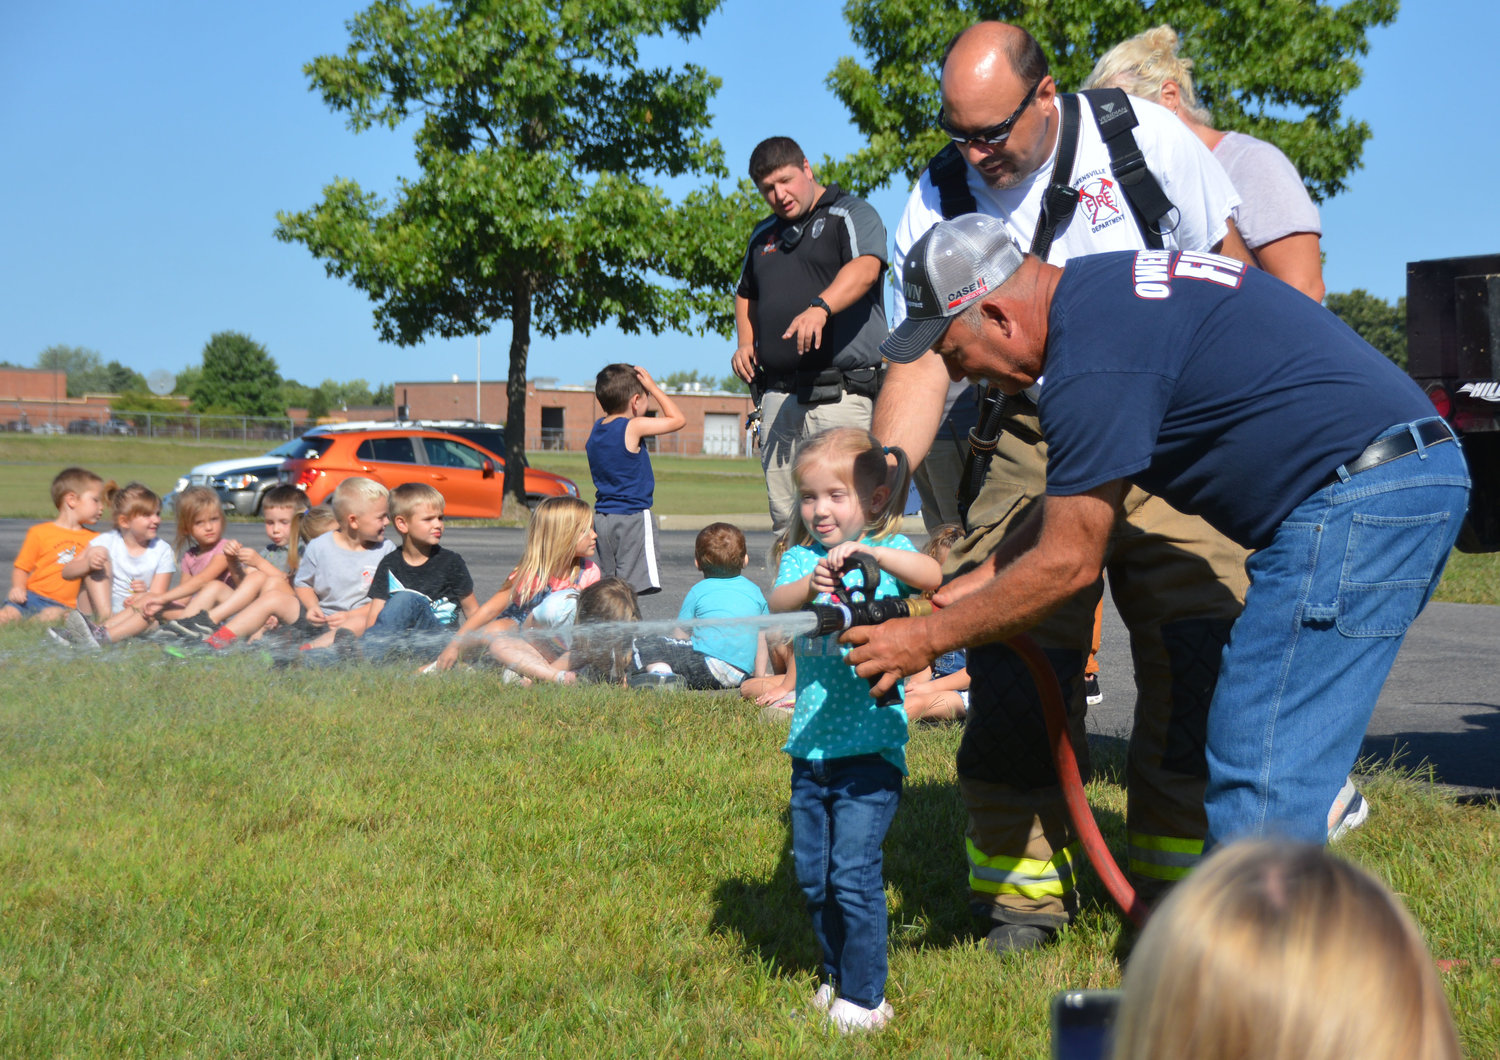 Rylee Shockley, an Owensville Elementary School preschool student, flows water from an Owensville Fire Department  hose Thursday under the supervision of volunteer firemen Assistant Chief Jeff Limberg and Chief Jeff Arnold (in back). Firemen were at the school with other emergency services agencies last week for programs about community leaders.